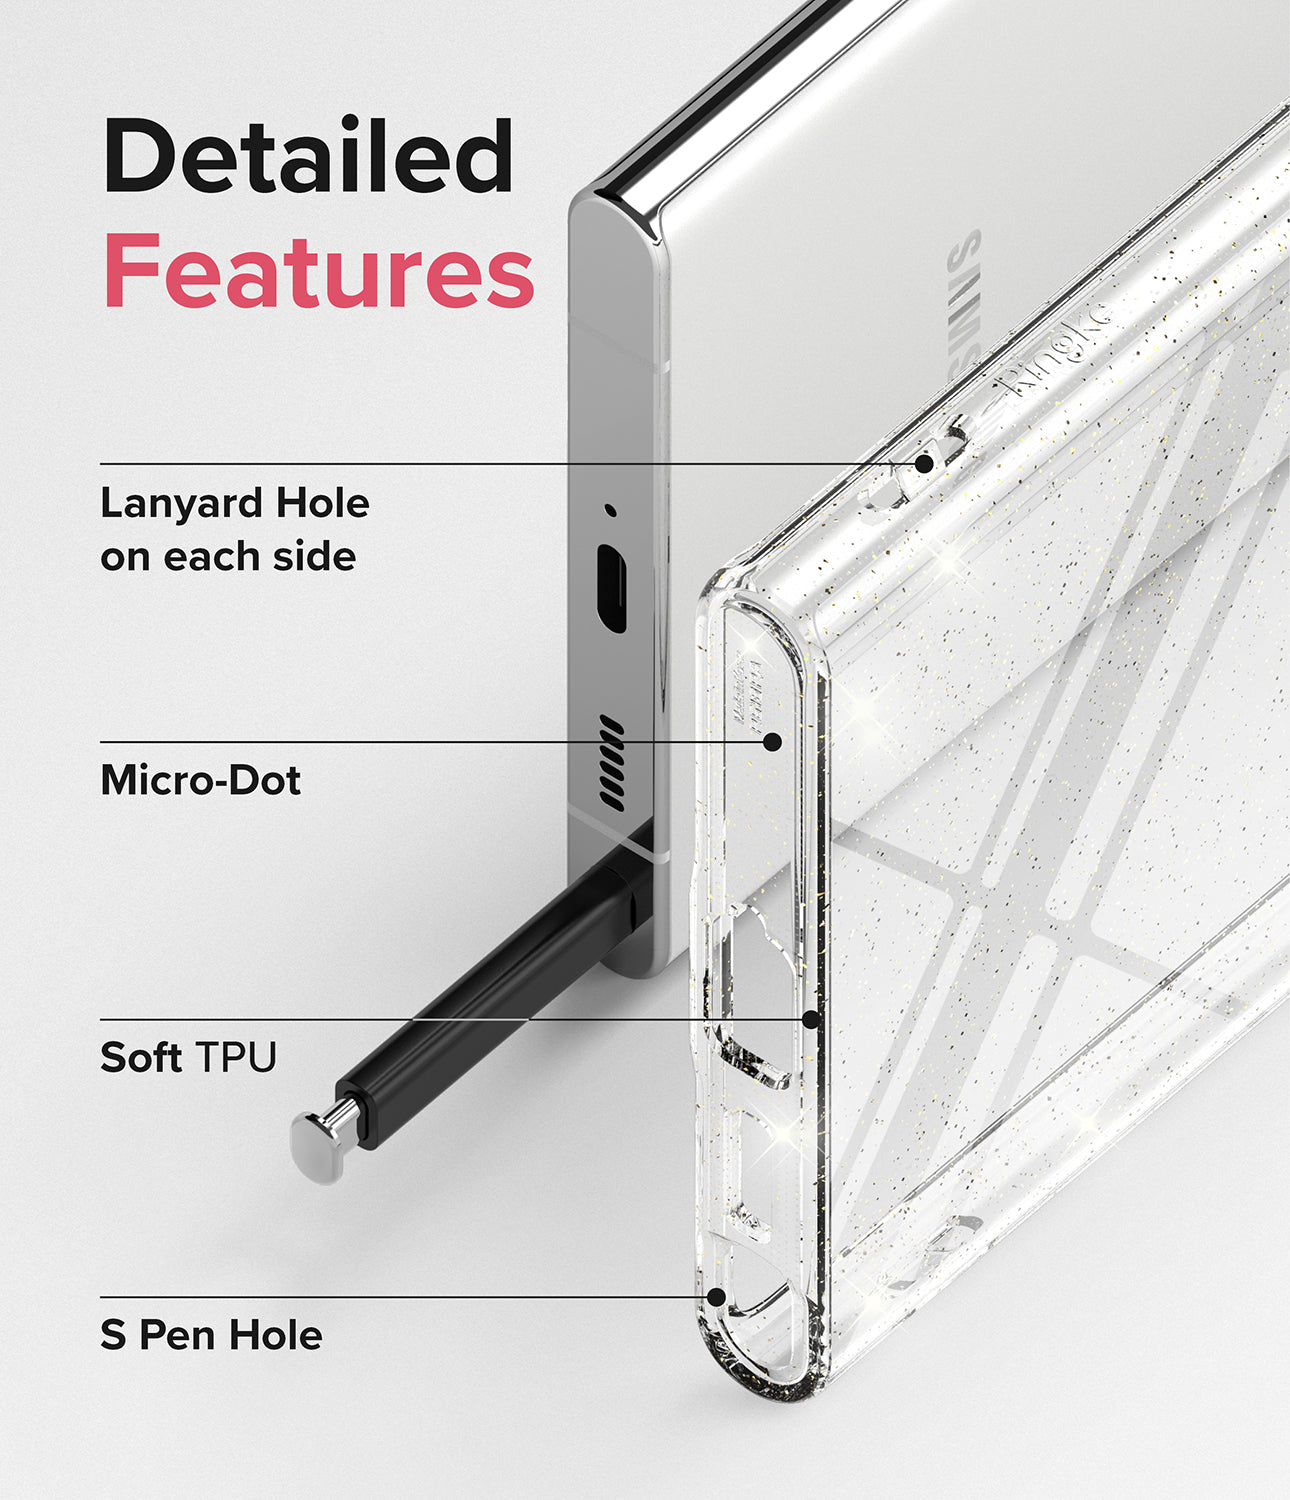 Galaxy S22 Ultra Case | Air - Glitter Clear - Detailed Features. Lanyard Hole on each side. Micro-Dot. Soft TPU. S Pen Hole